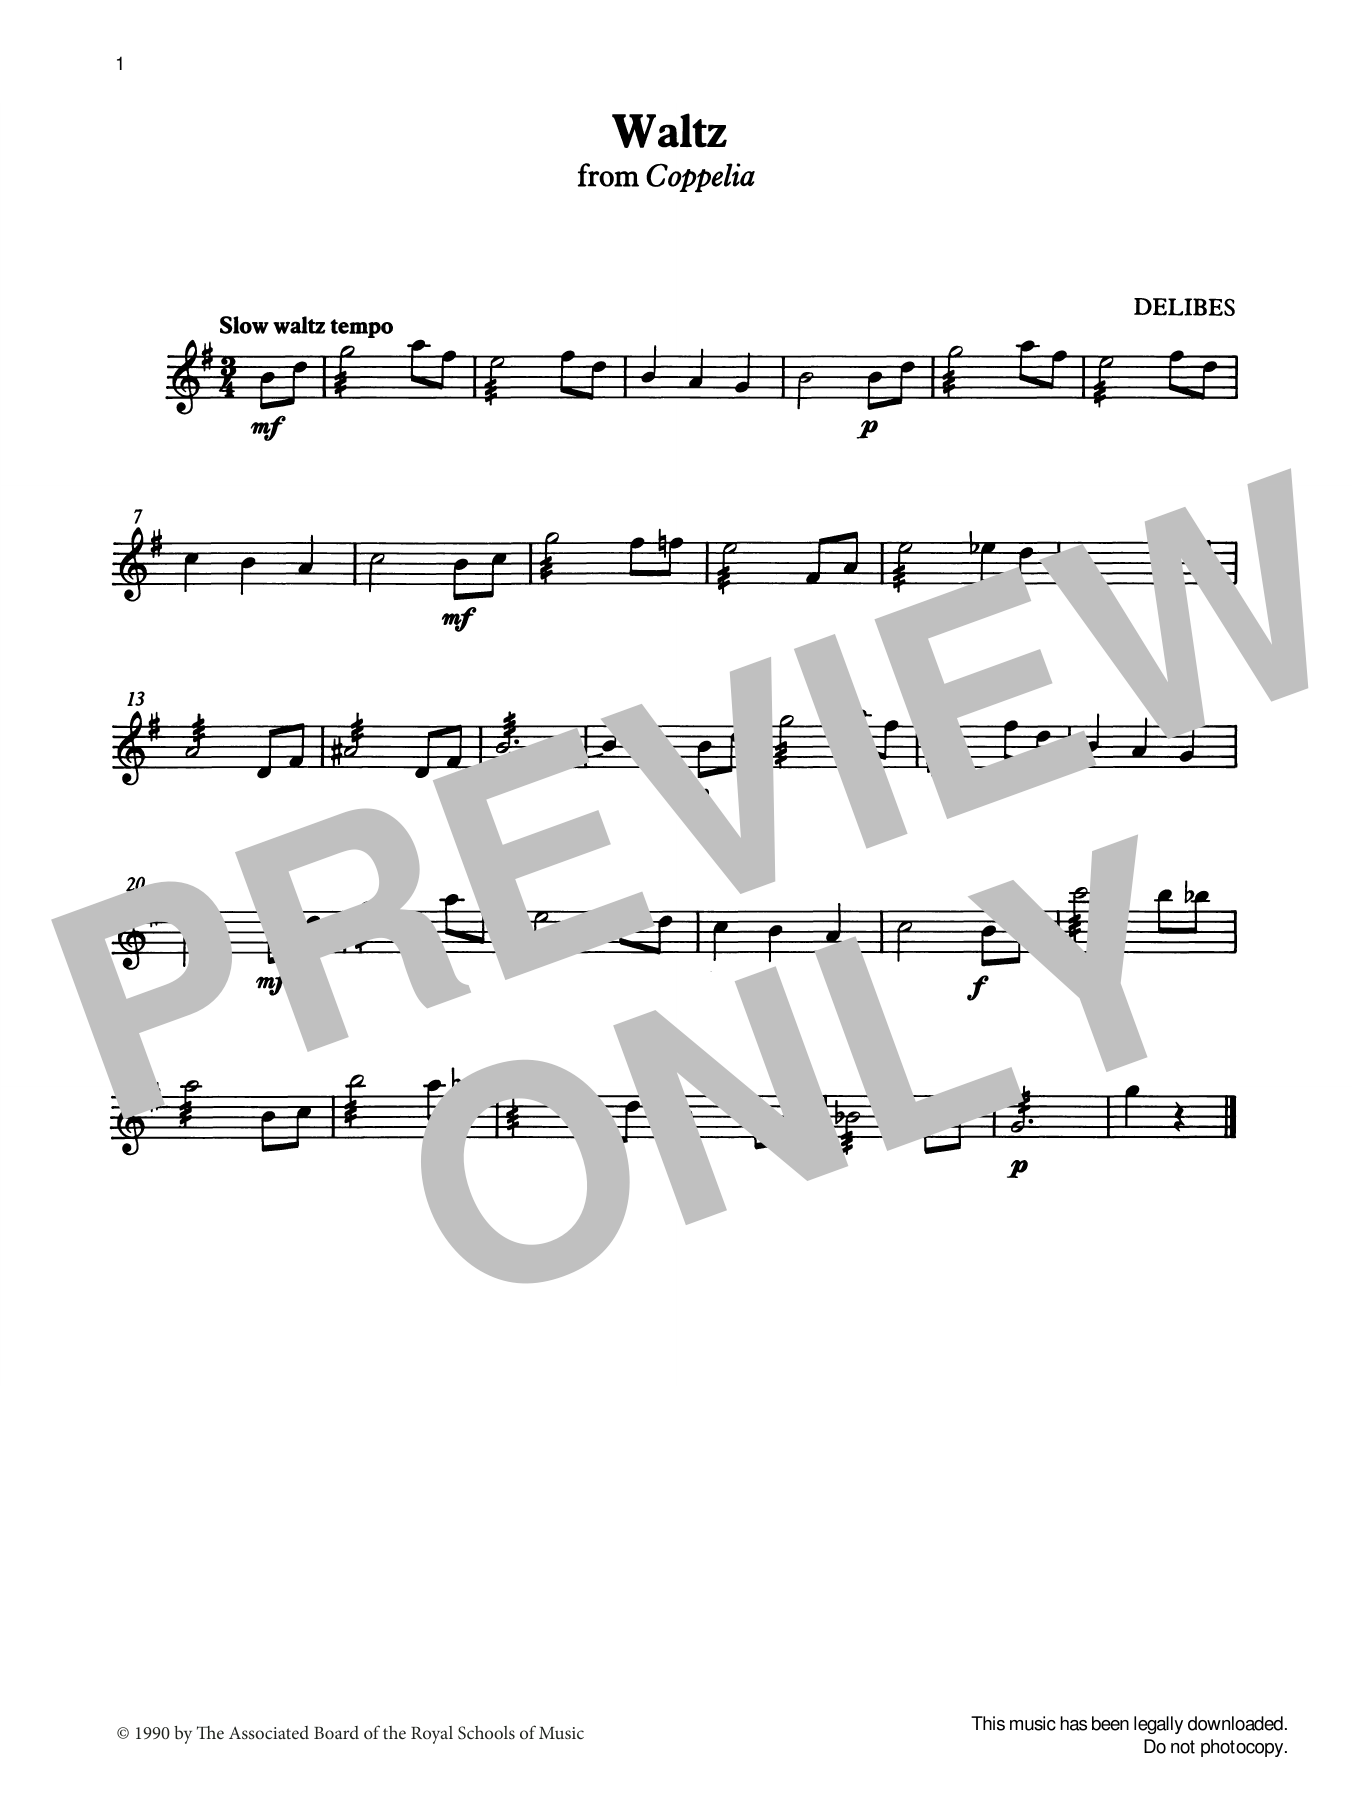 Download Leo Delibes Waltz from Graded Music for Tuned Percu Sheet Music